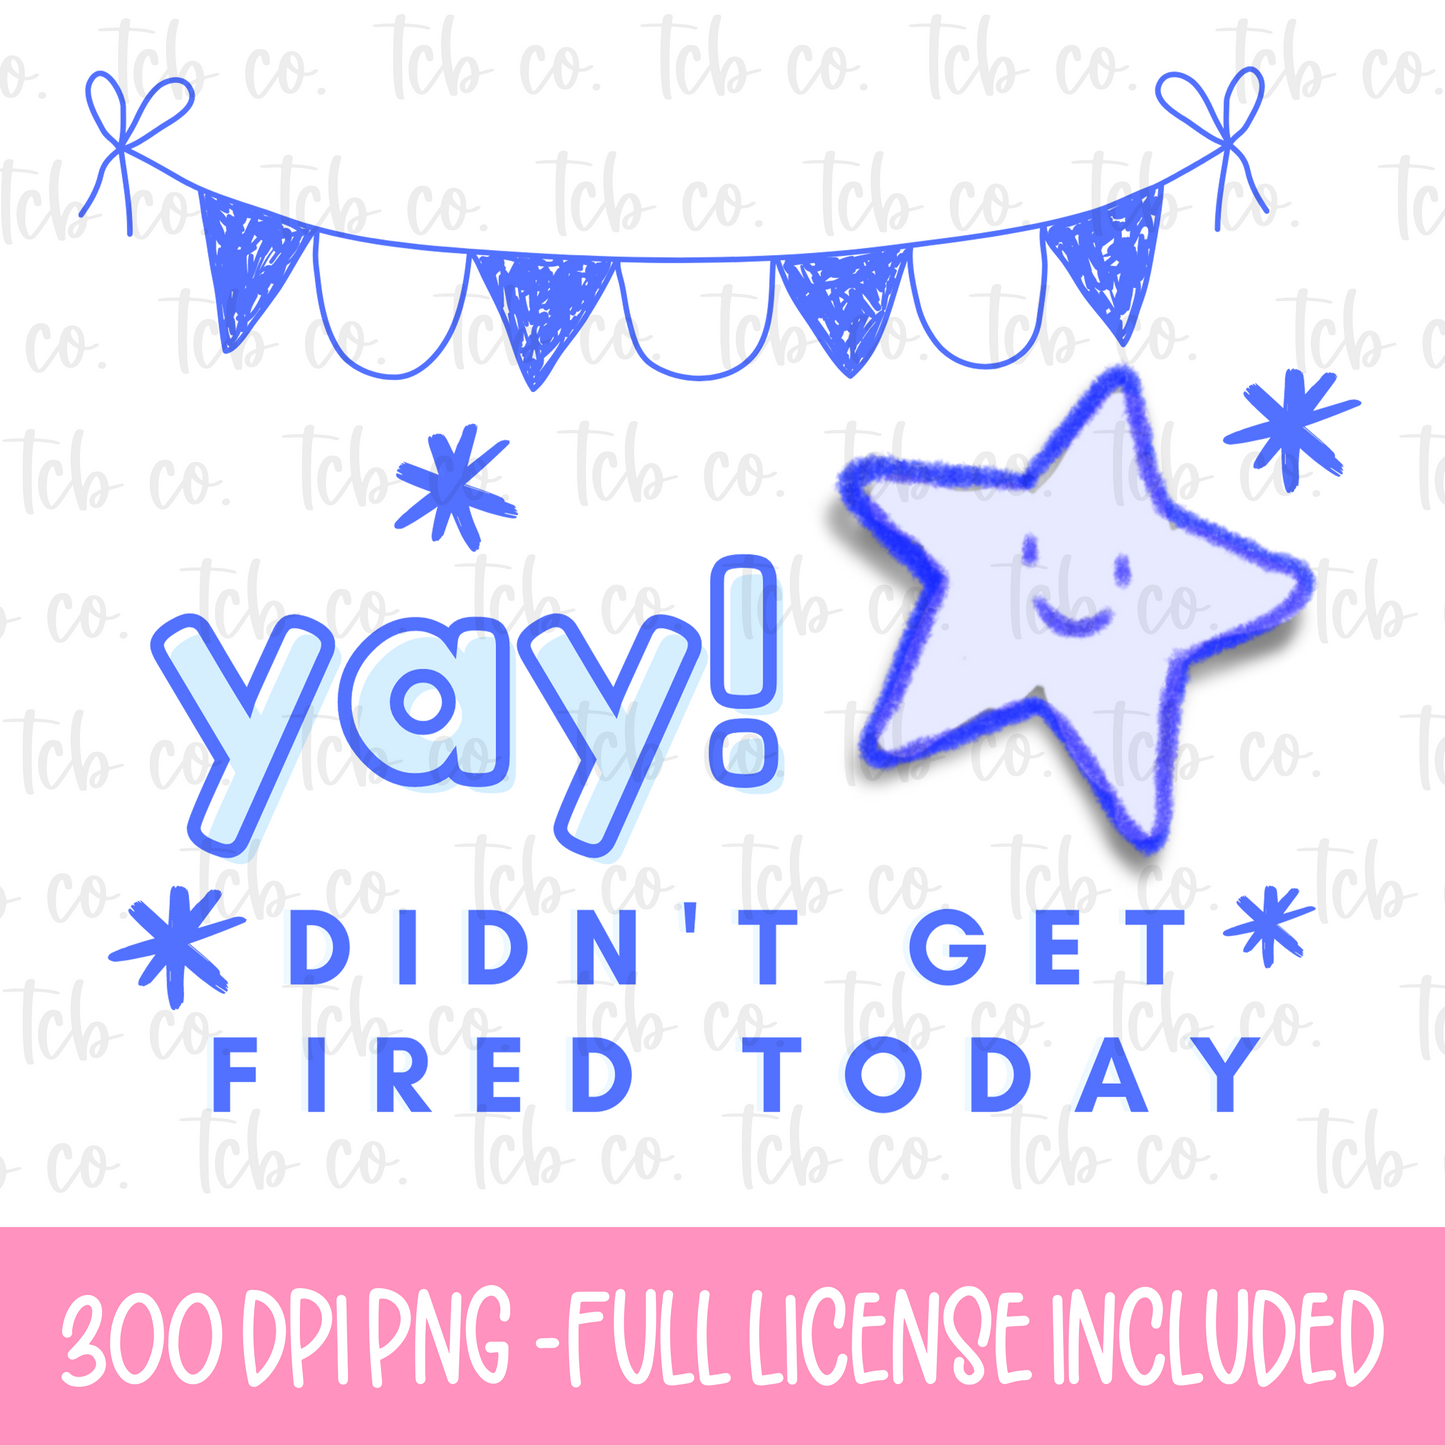 Yay! Didn't Get Fired Today